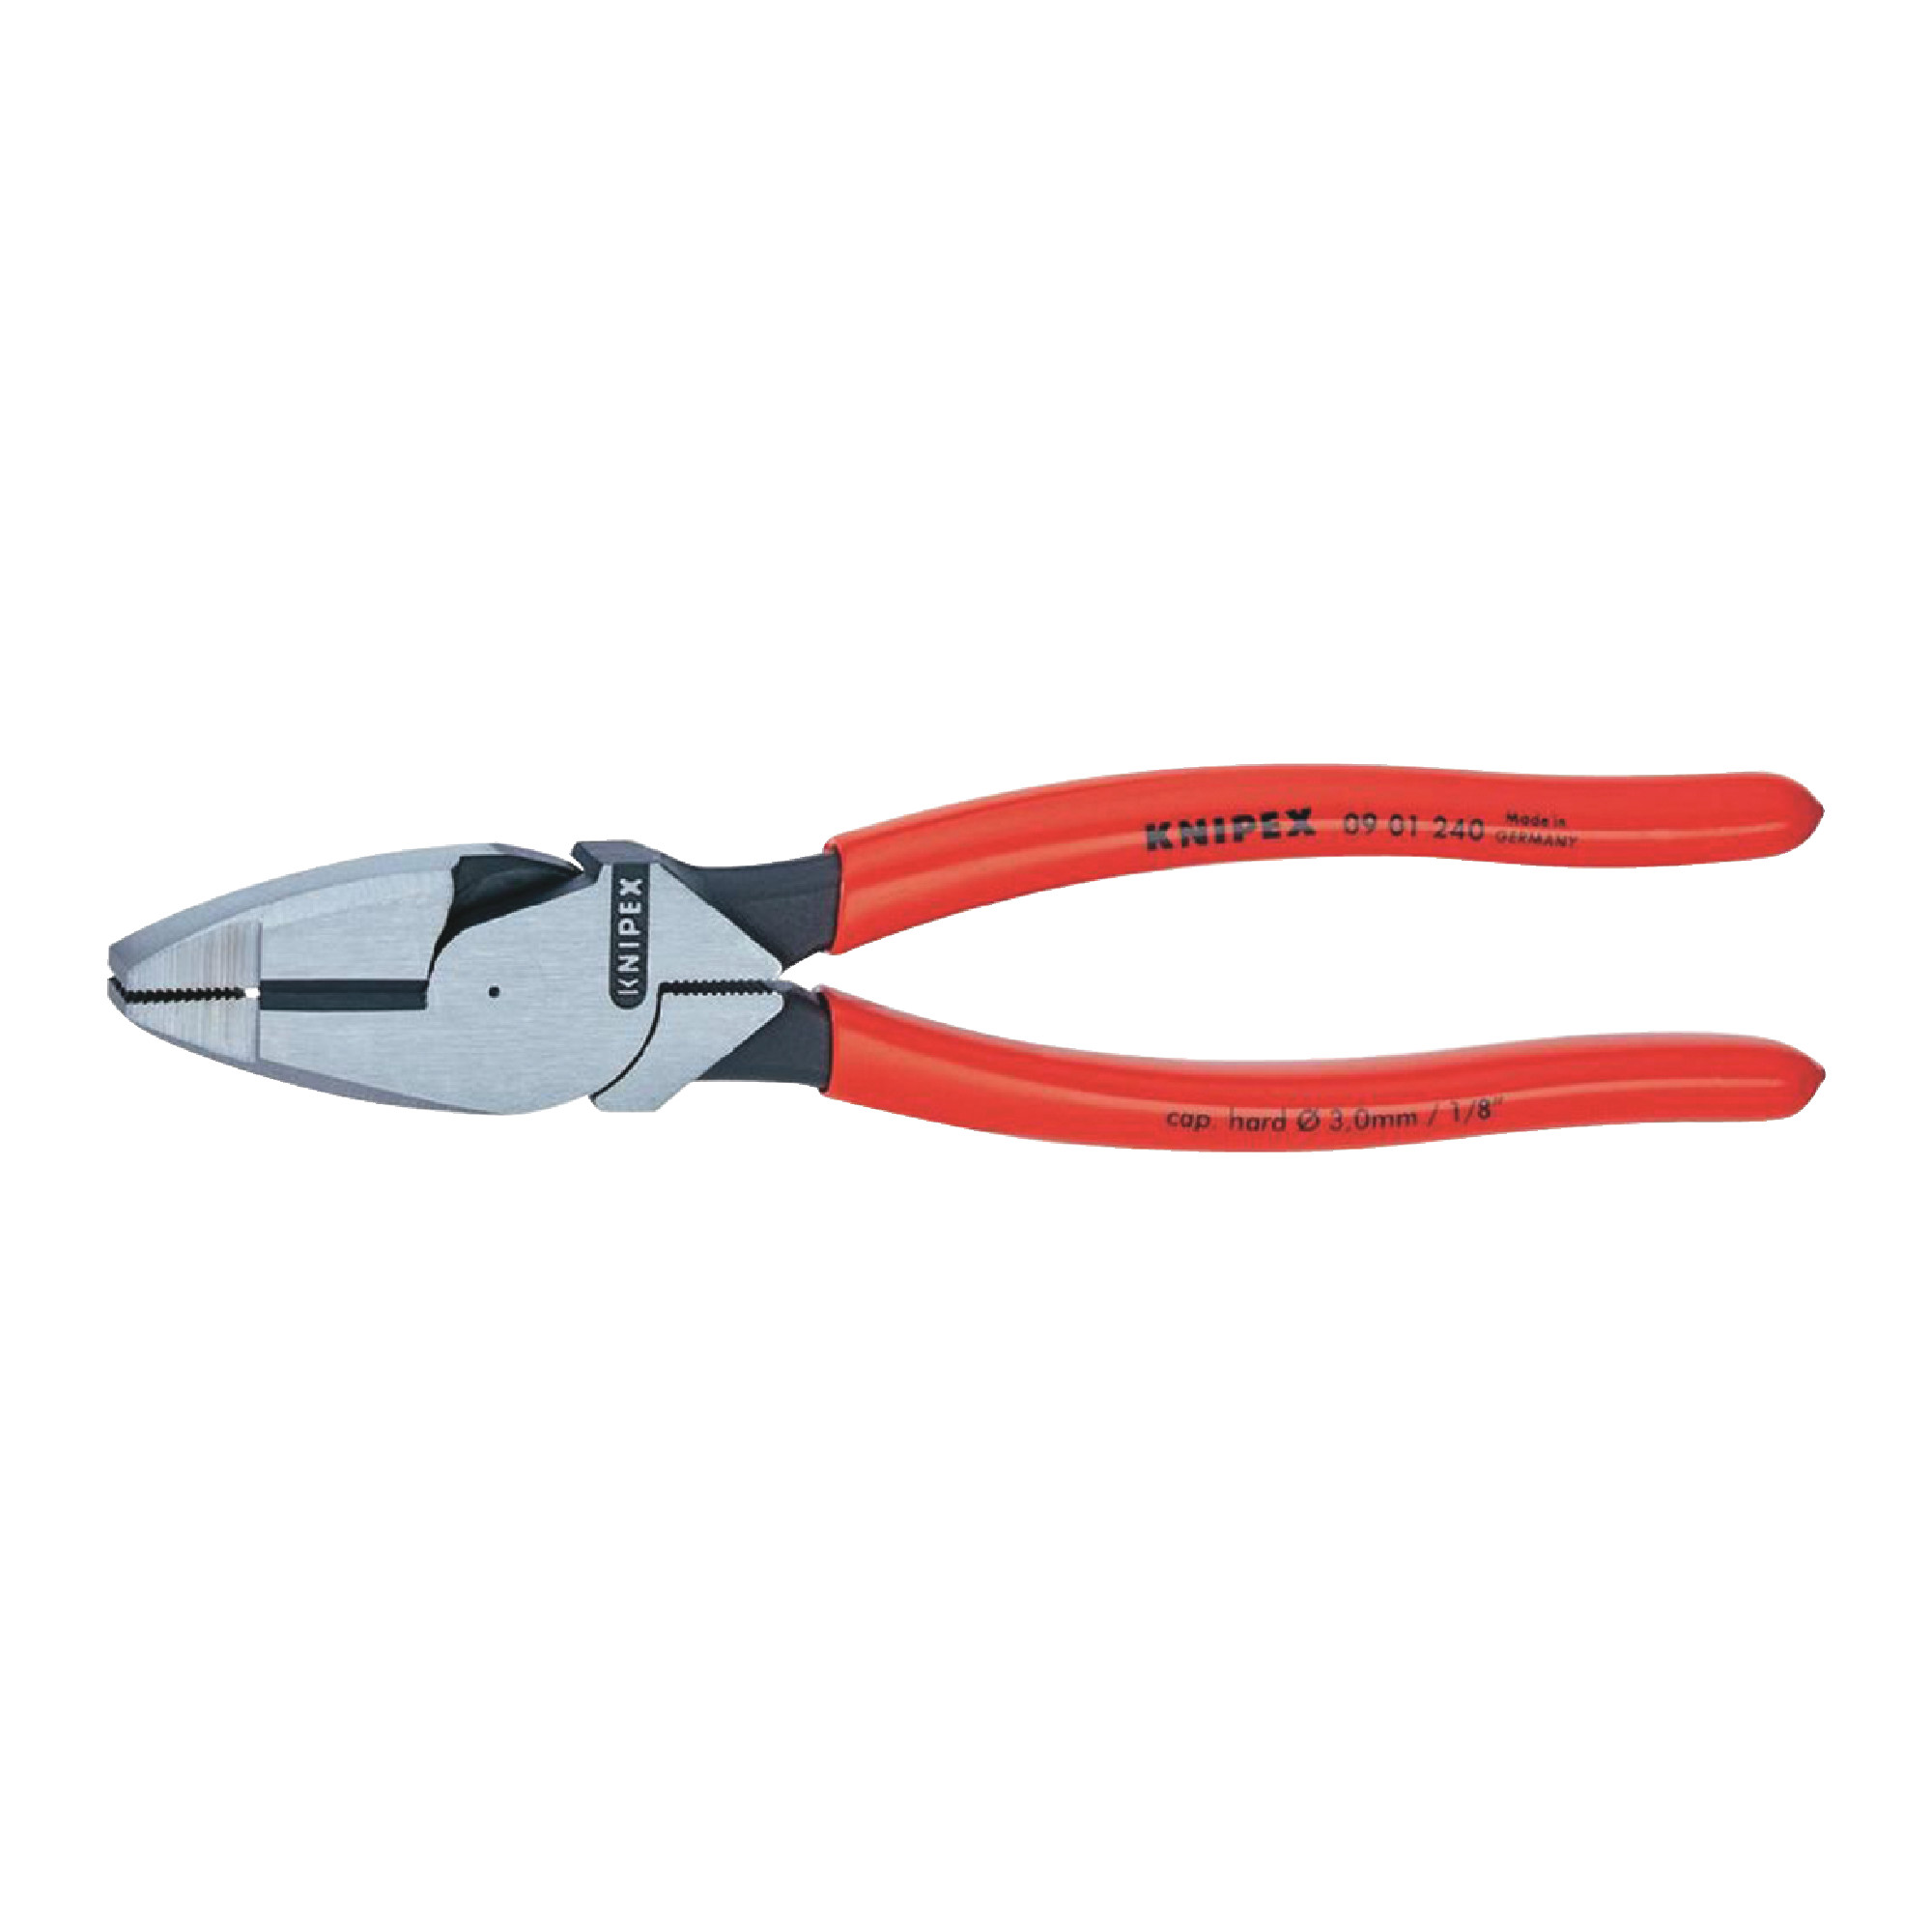 New England Lineman's Style Pliers